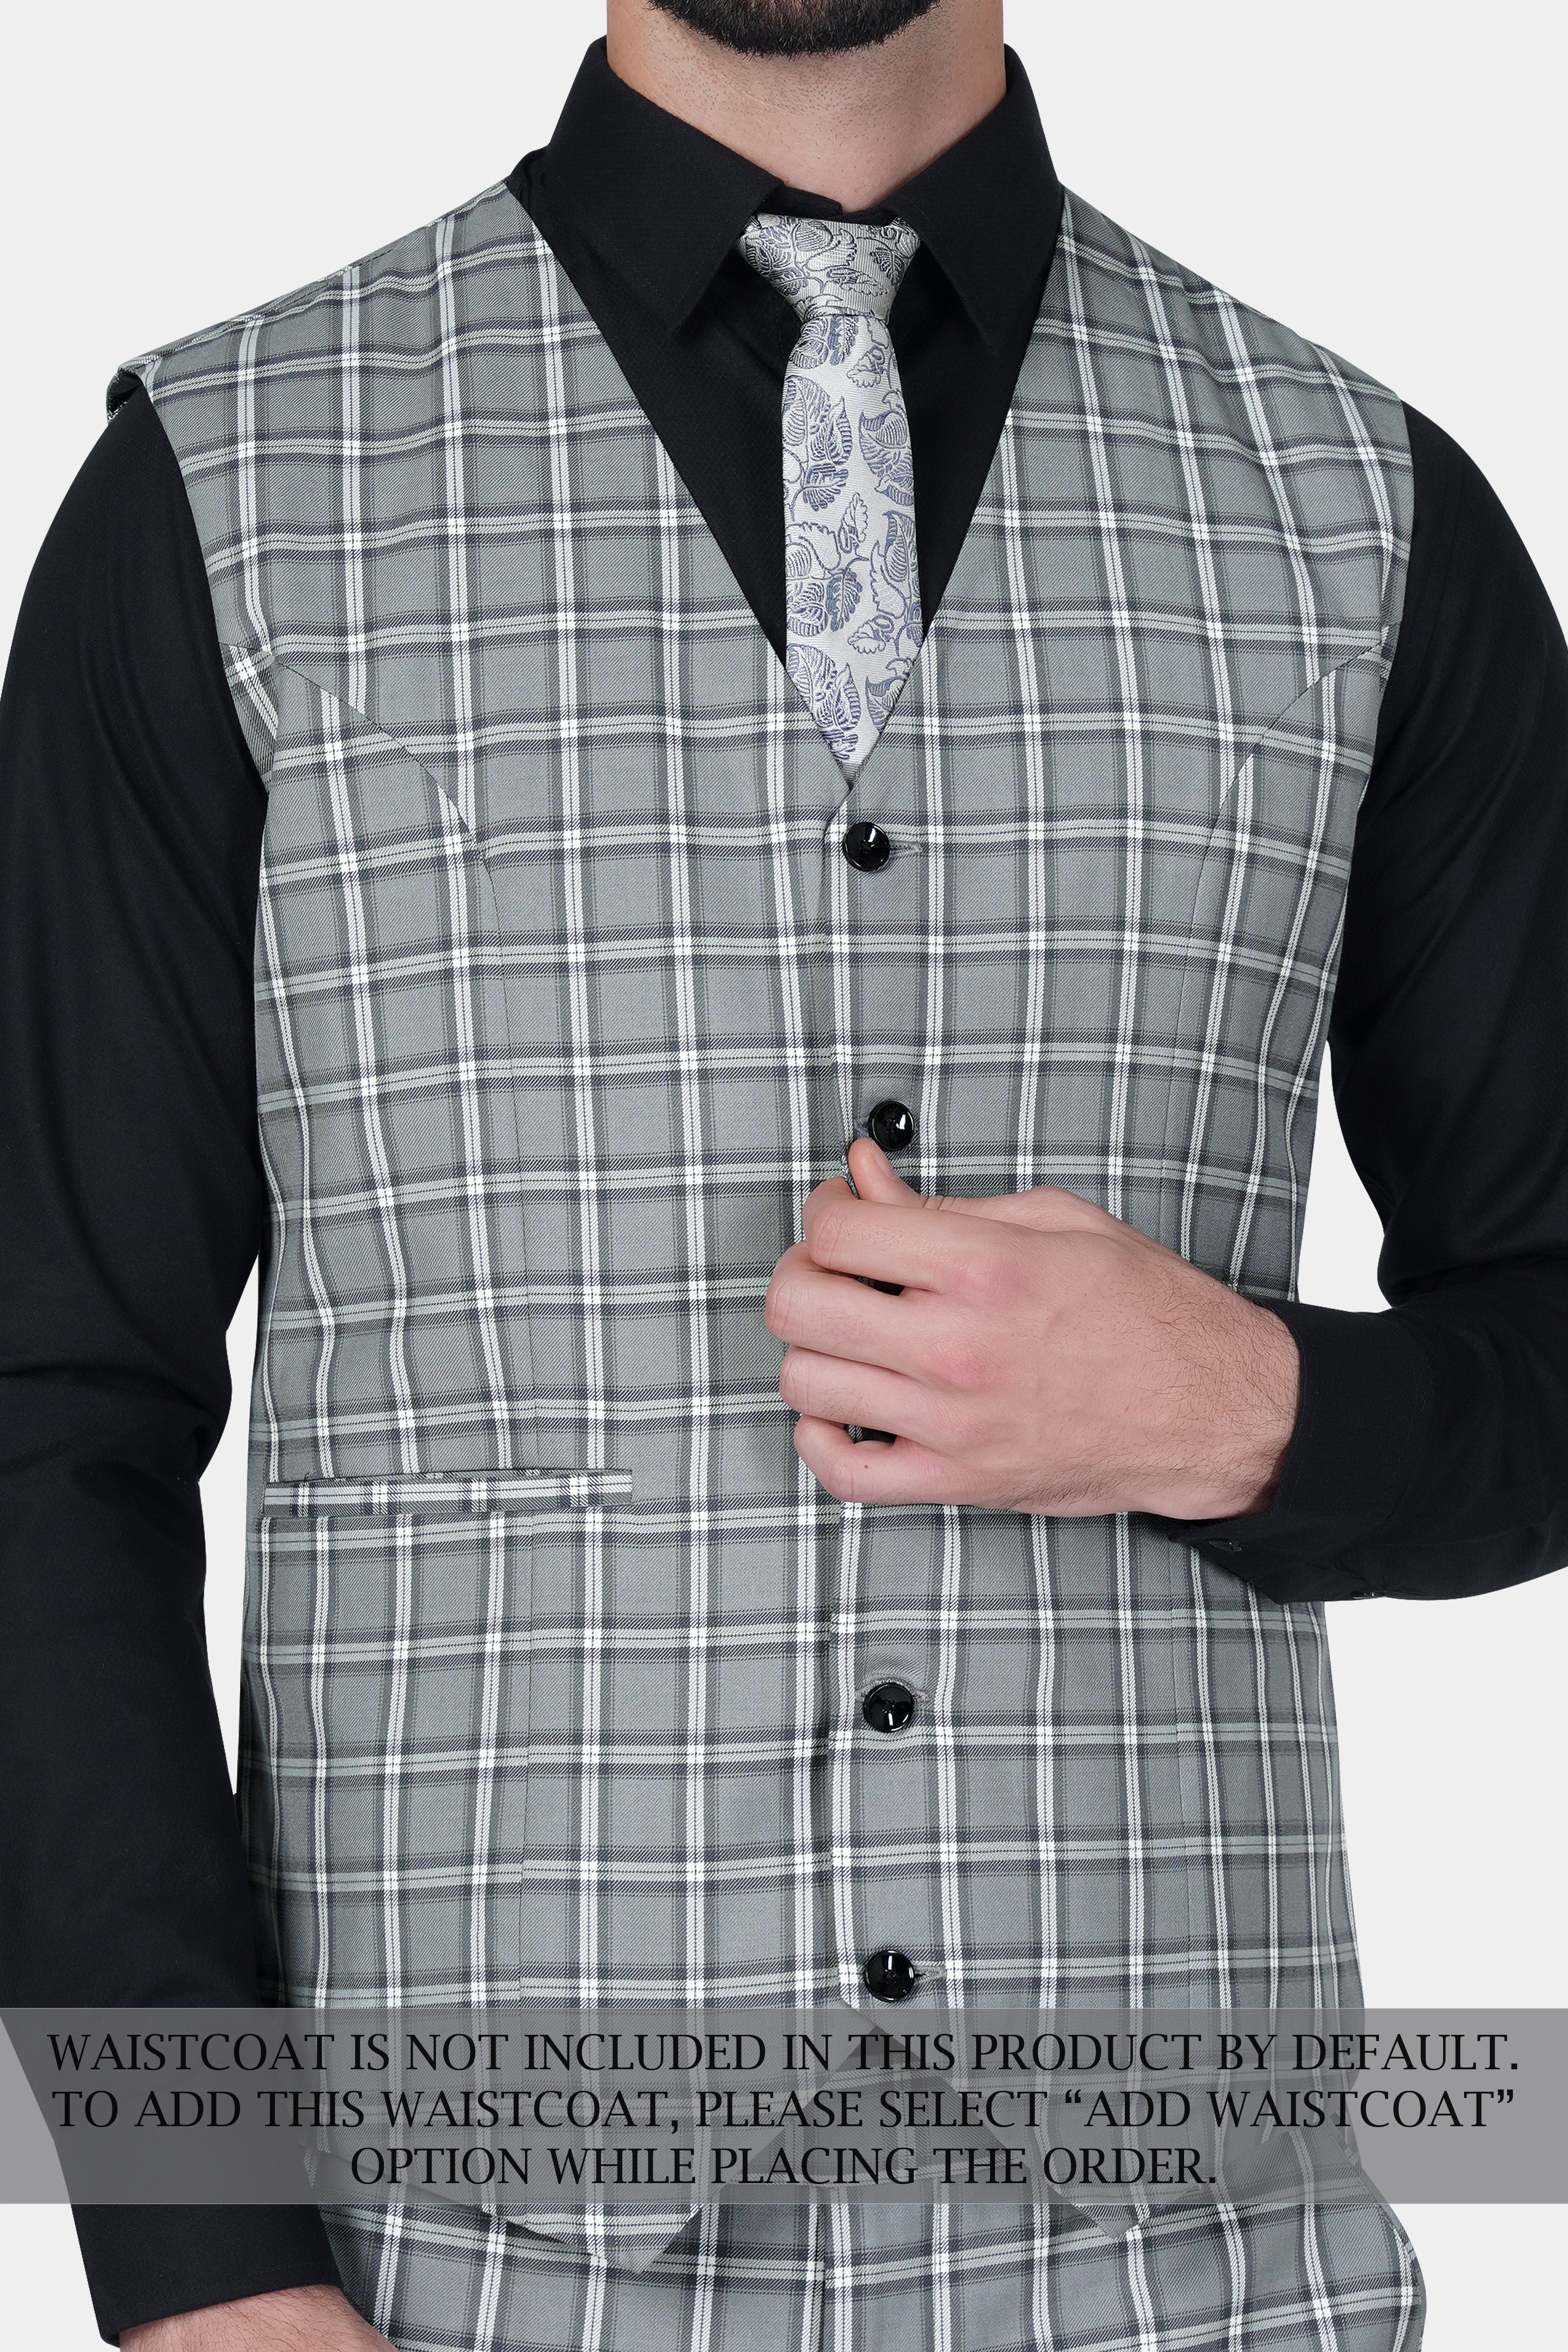 Pewter Gray and White Windowpane Wool Rich Suit ST3134-SB-36, ST3134-SB-38, ST3134-SB-40, ST3134-SB-42, ST3134-SB-44, ST3134-SB-46, ST3134-SB-48, ST3134-SB-50, ST3134-SB-52, ST3134-SB-54, ST3134-SB-56, ST3134-SB-58, ST3134-SB-60